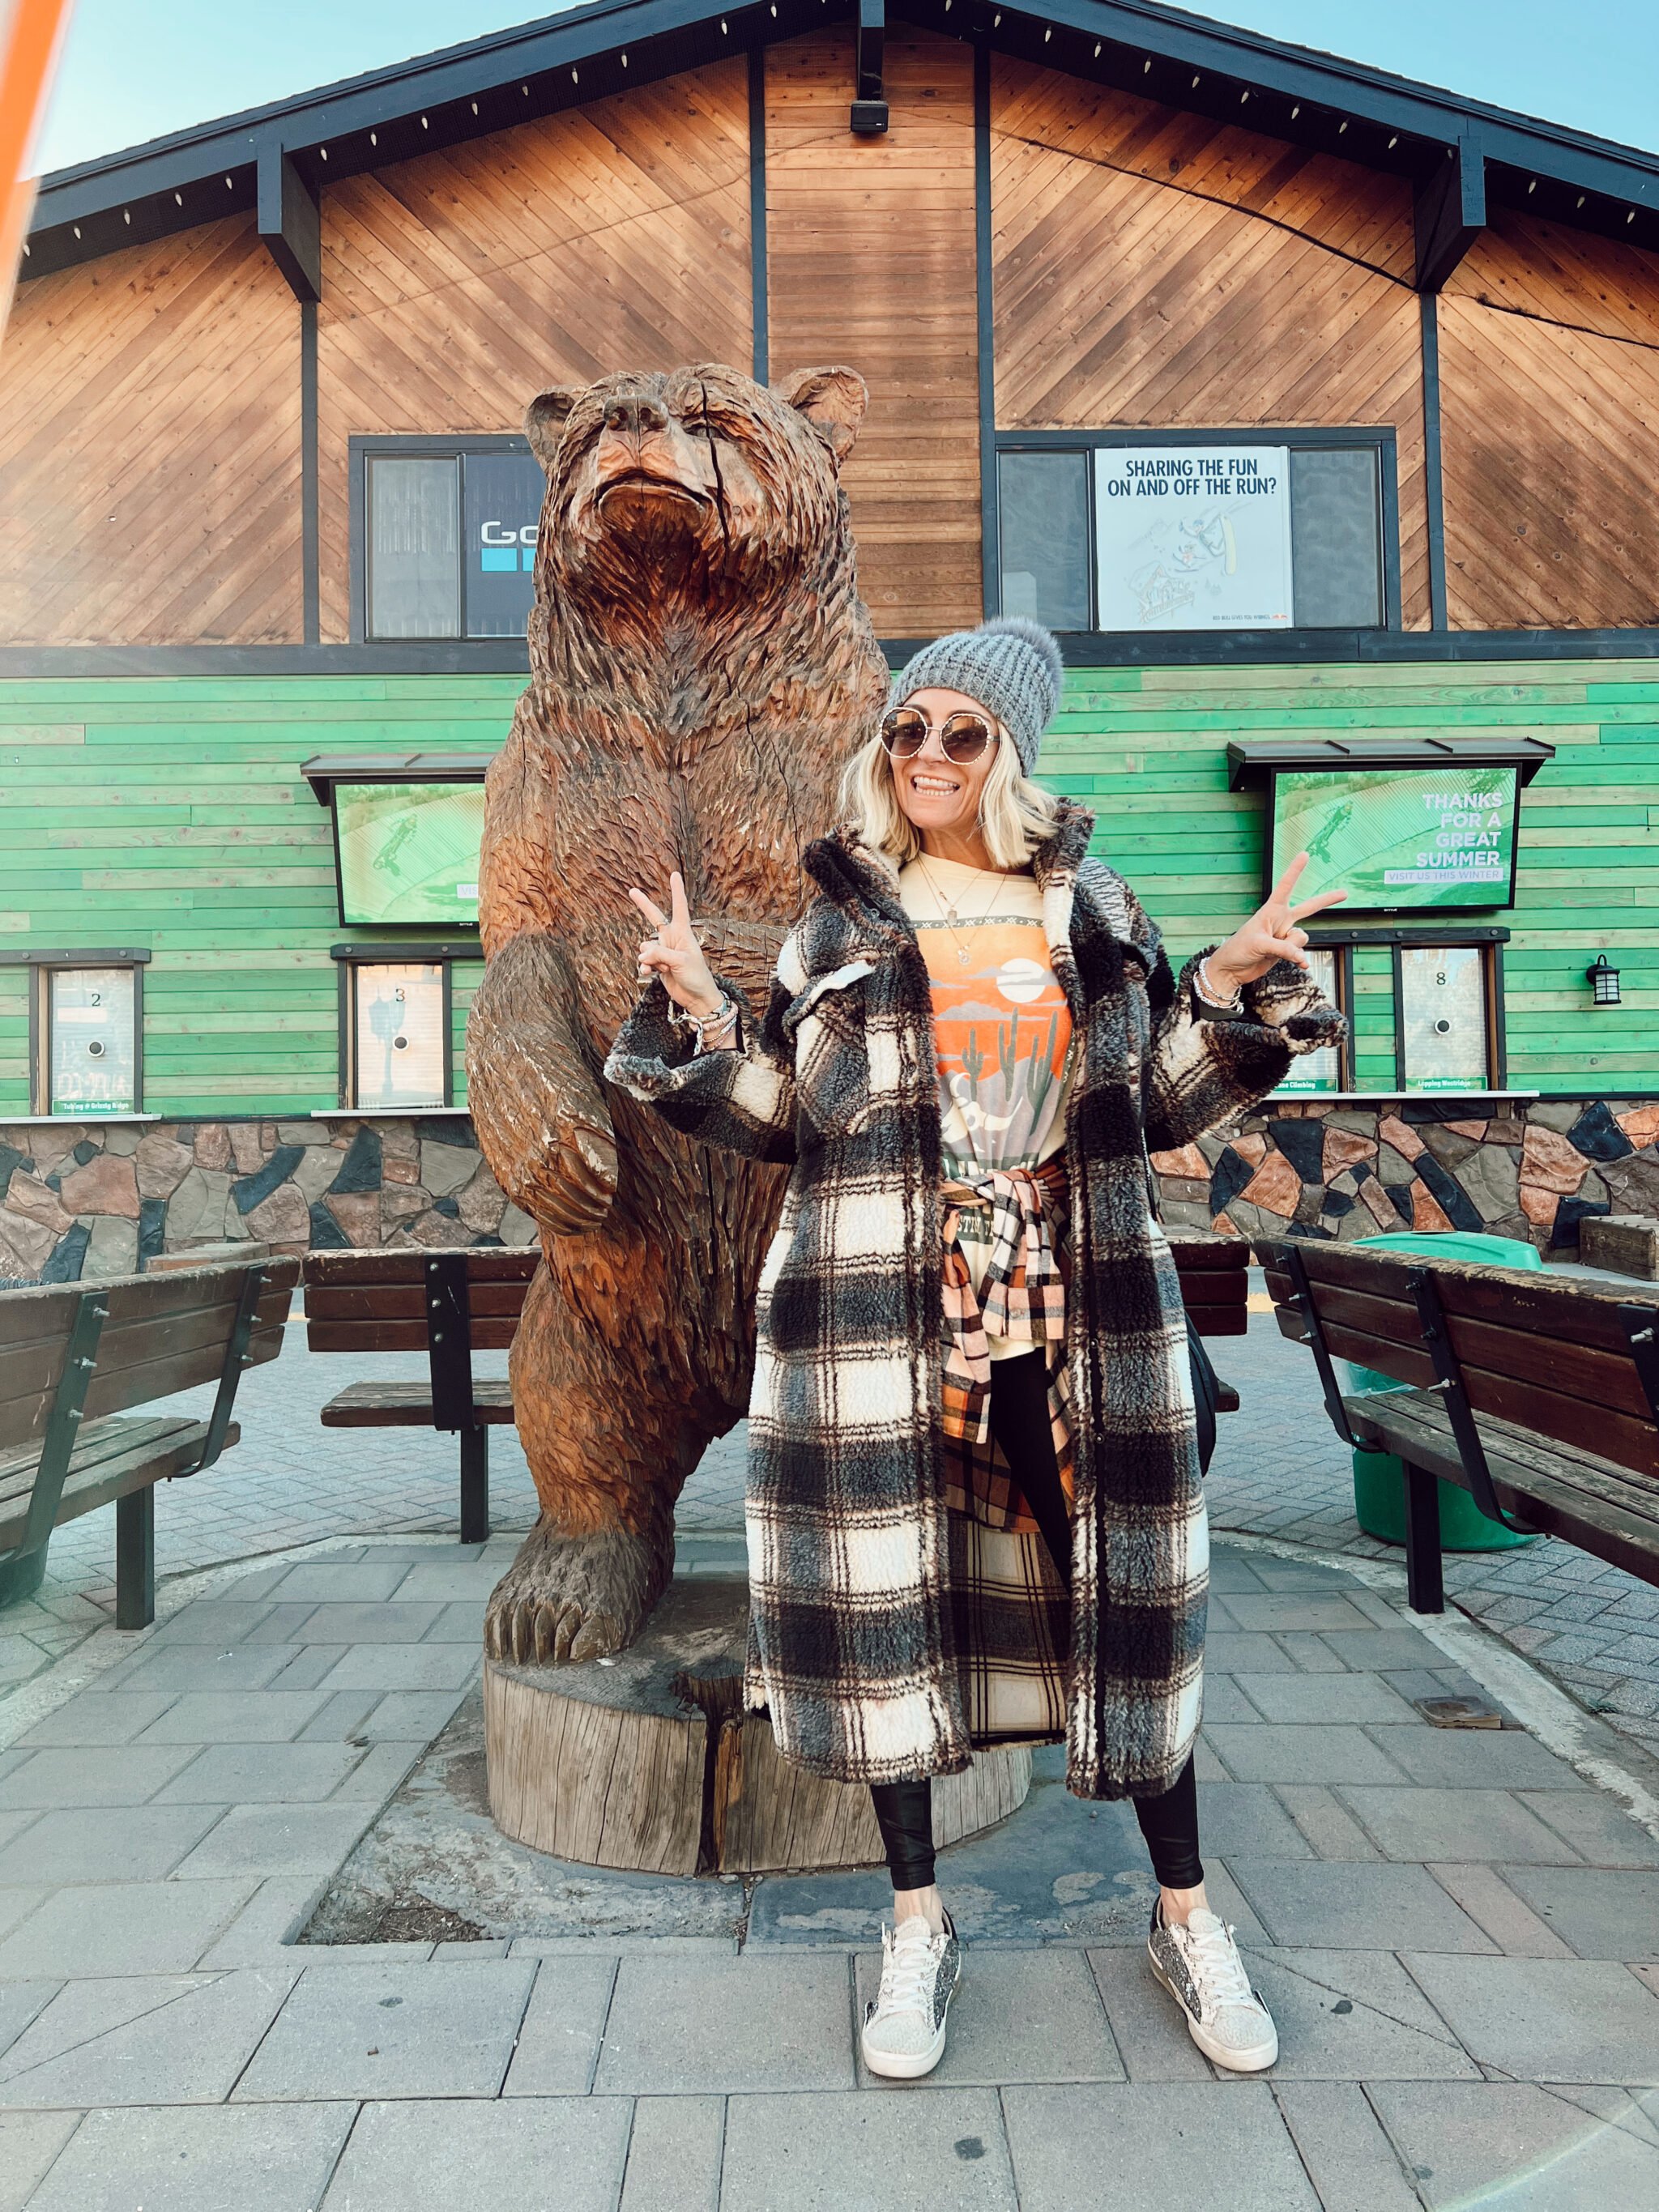 woman posing with a bear statue